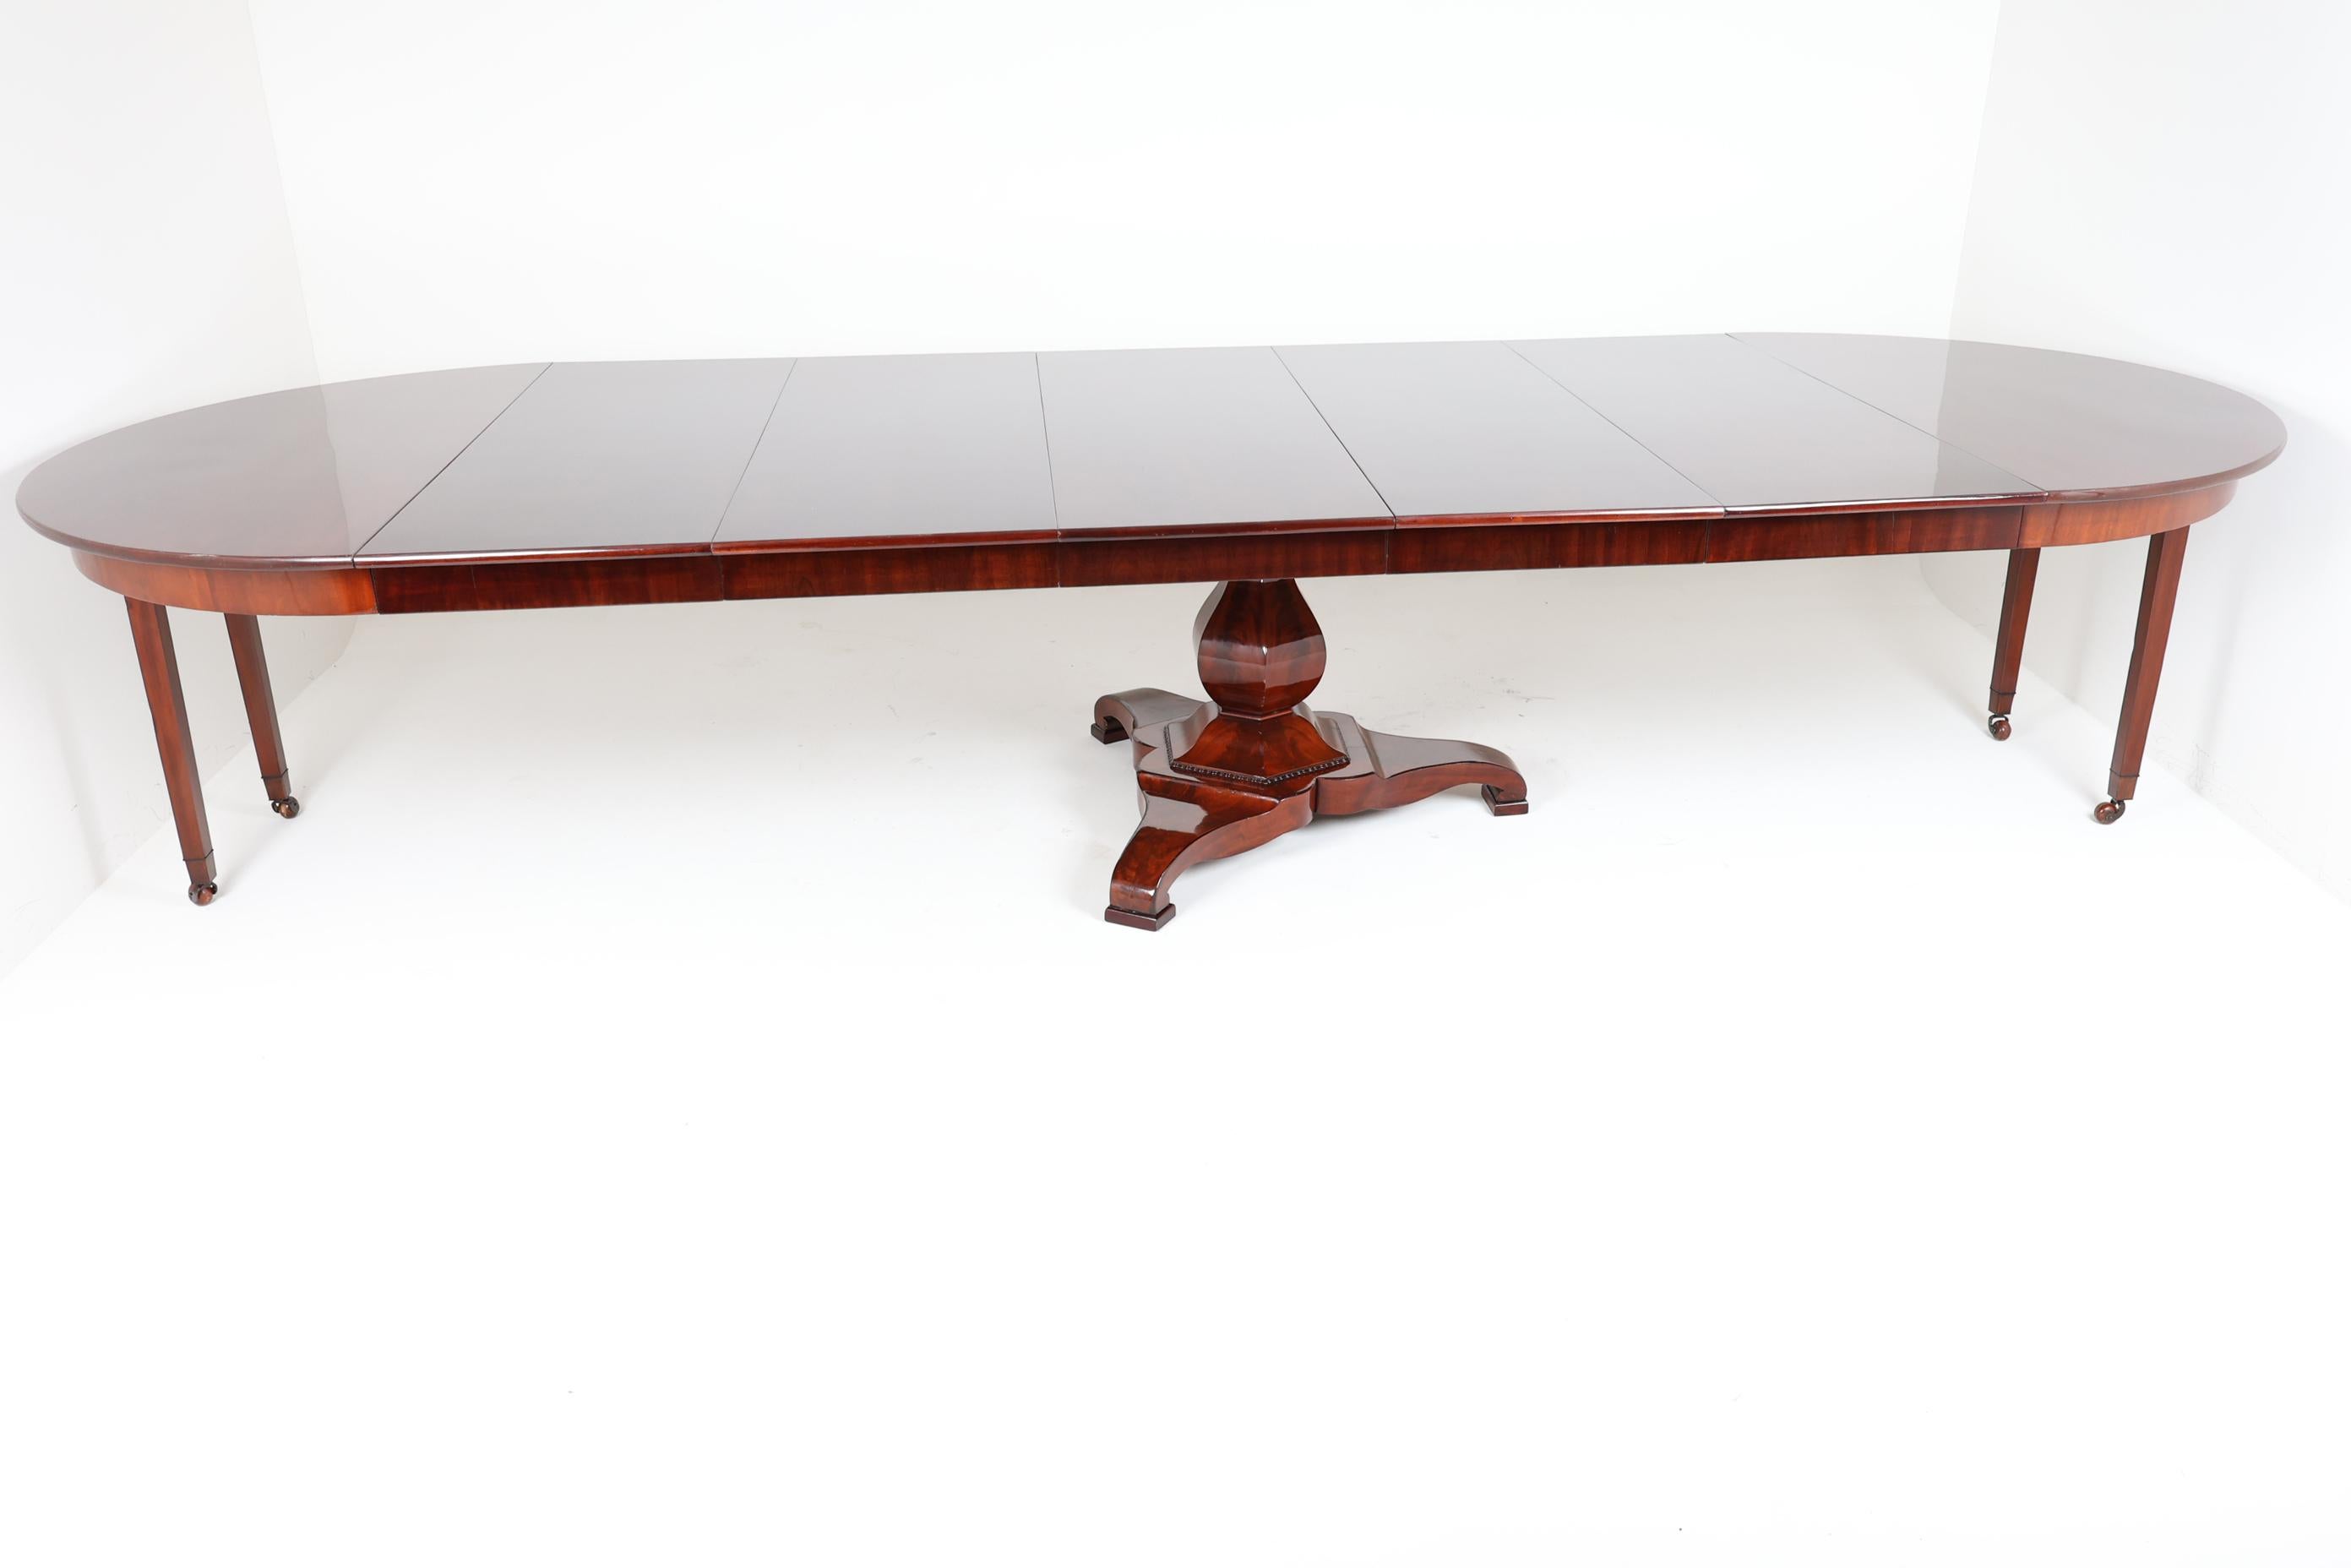 19th Century Mahogany Dining Room Table, 177 inches Long In Good Condition For Sale In Stahnsdorf, DE